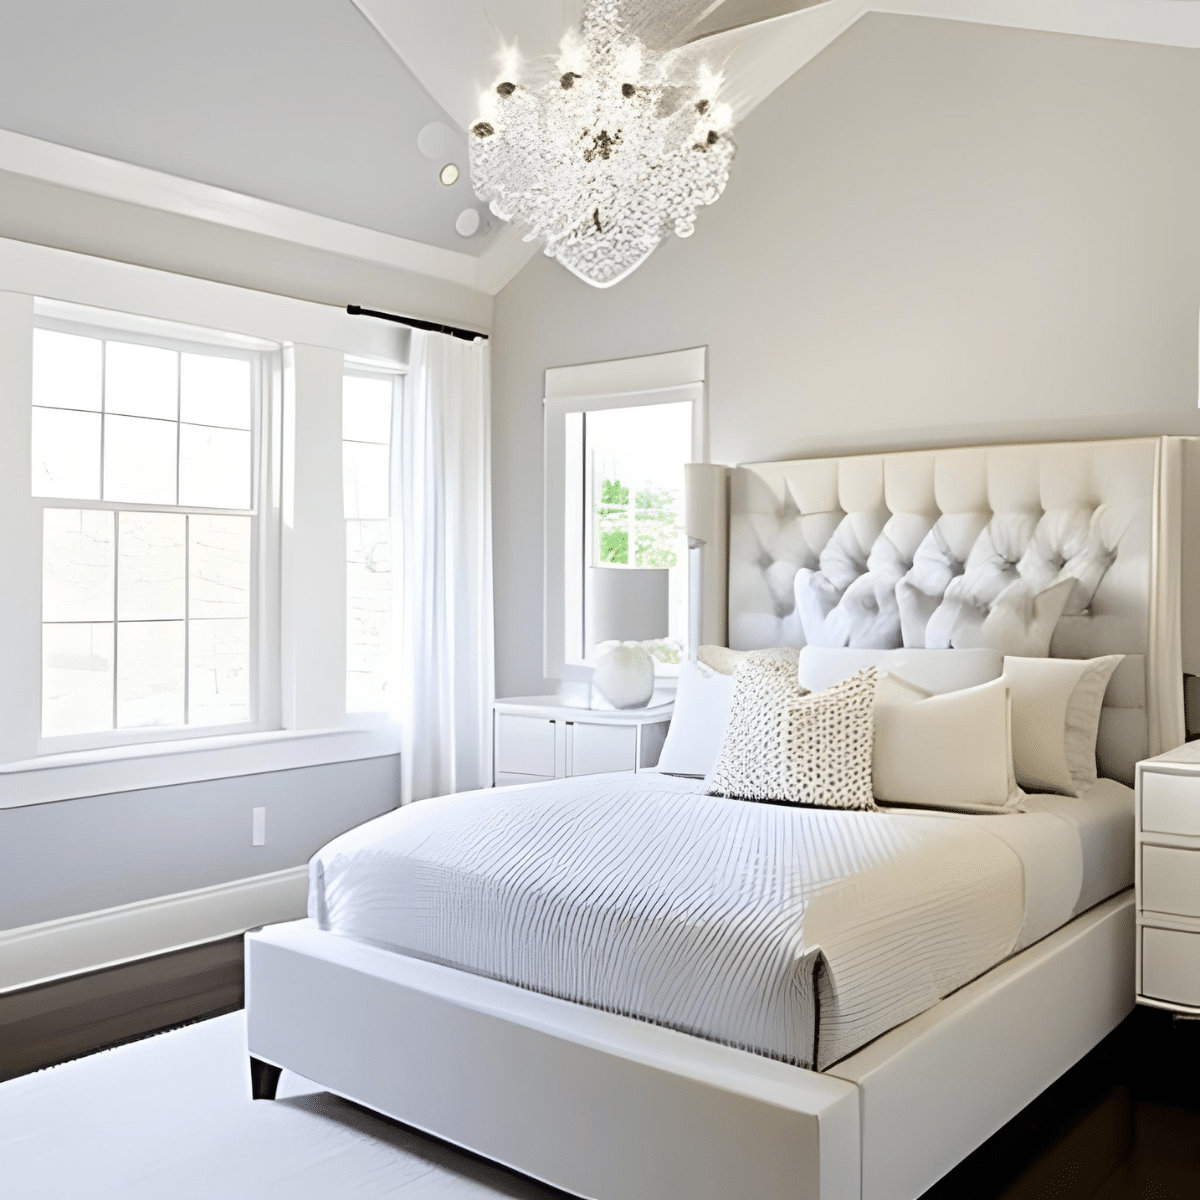 all-white bedroom with a small crystal chandelier and wide window